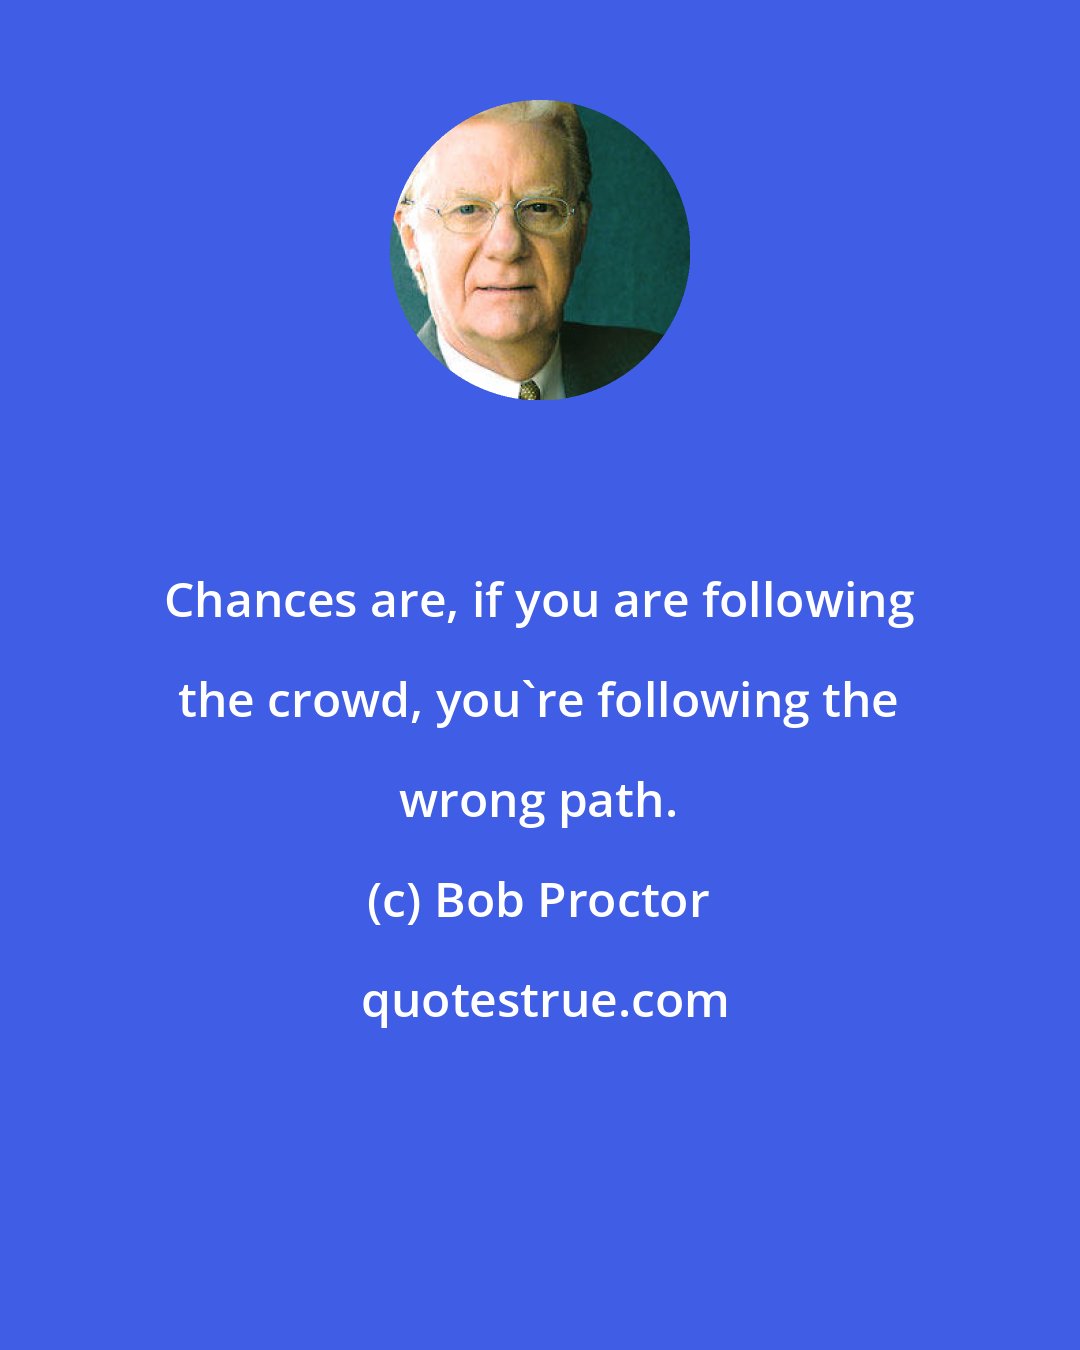 Bob Proctor: Chances are, if you are following the crowd, you're following the wrong path.